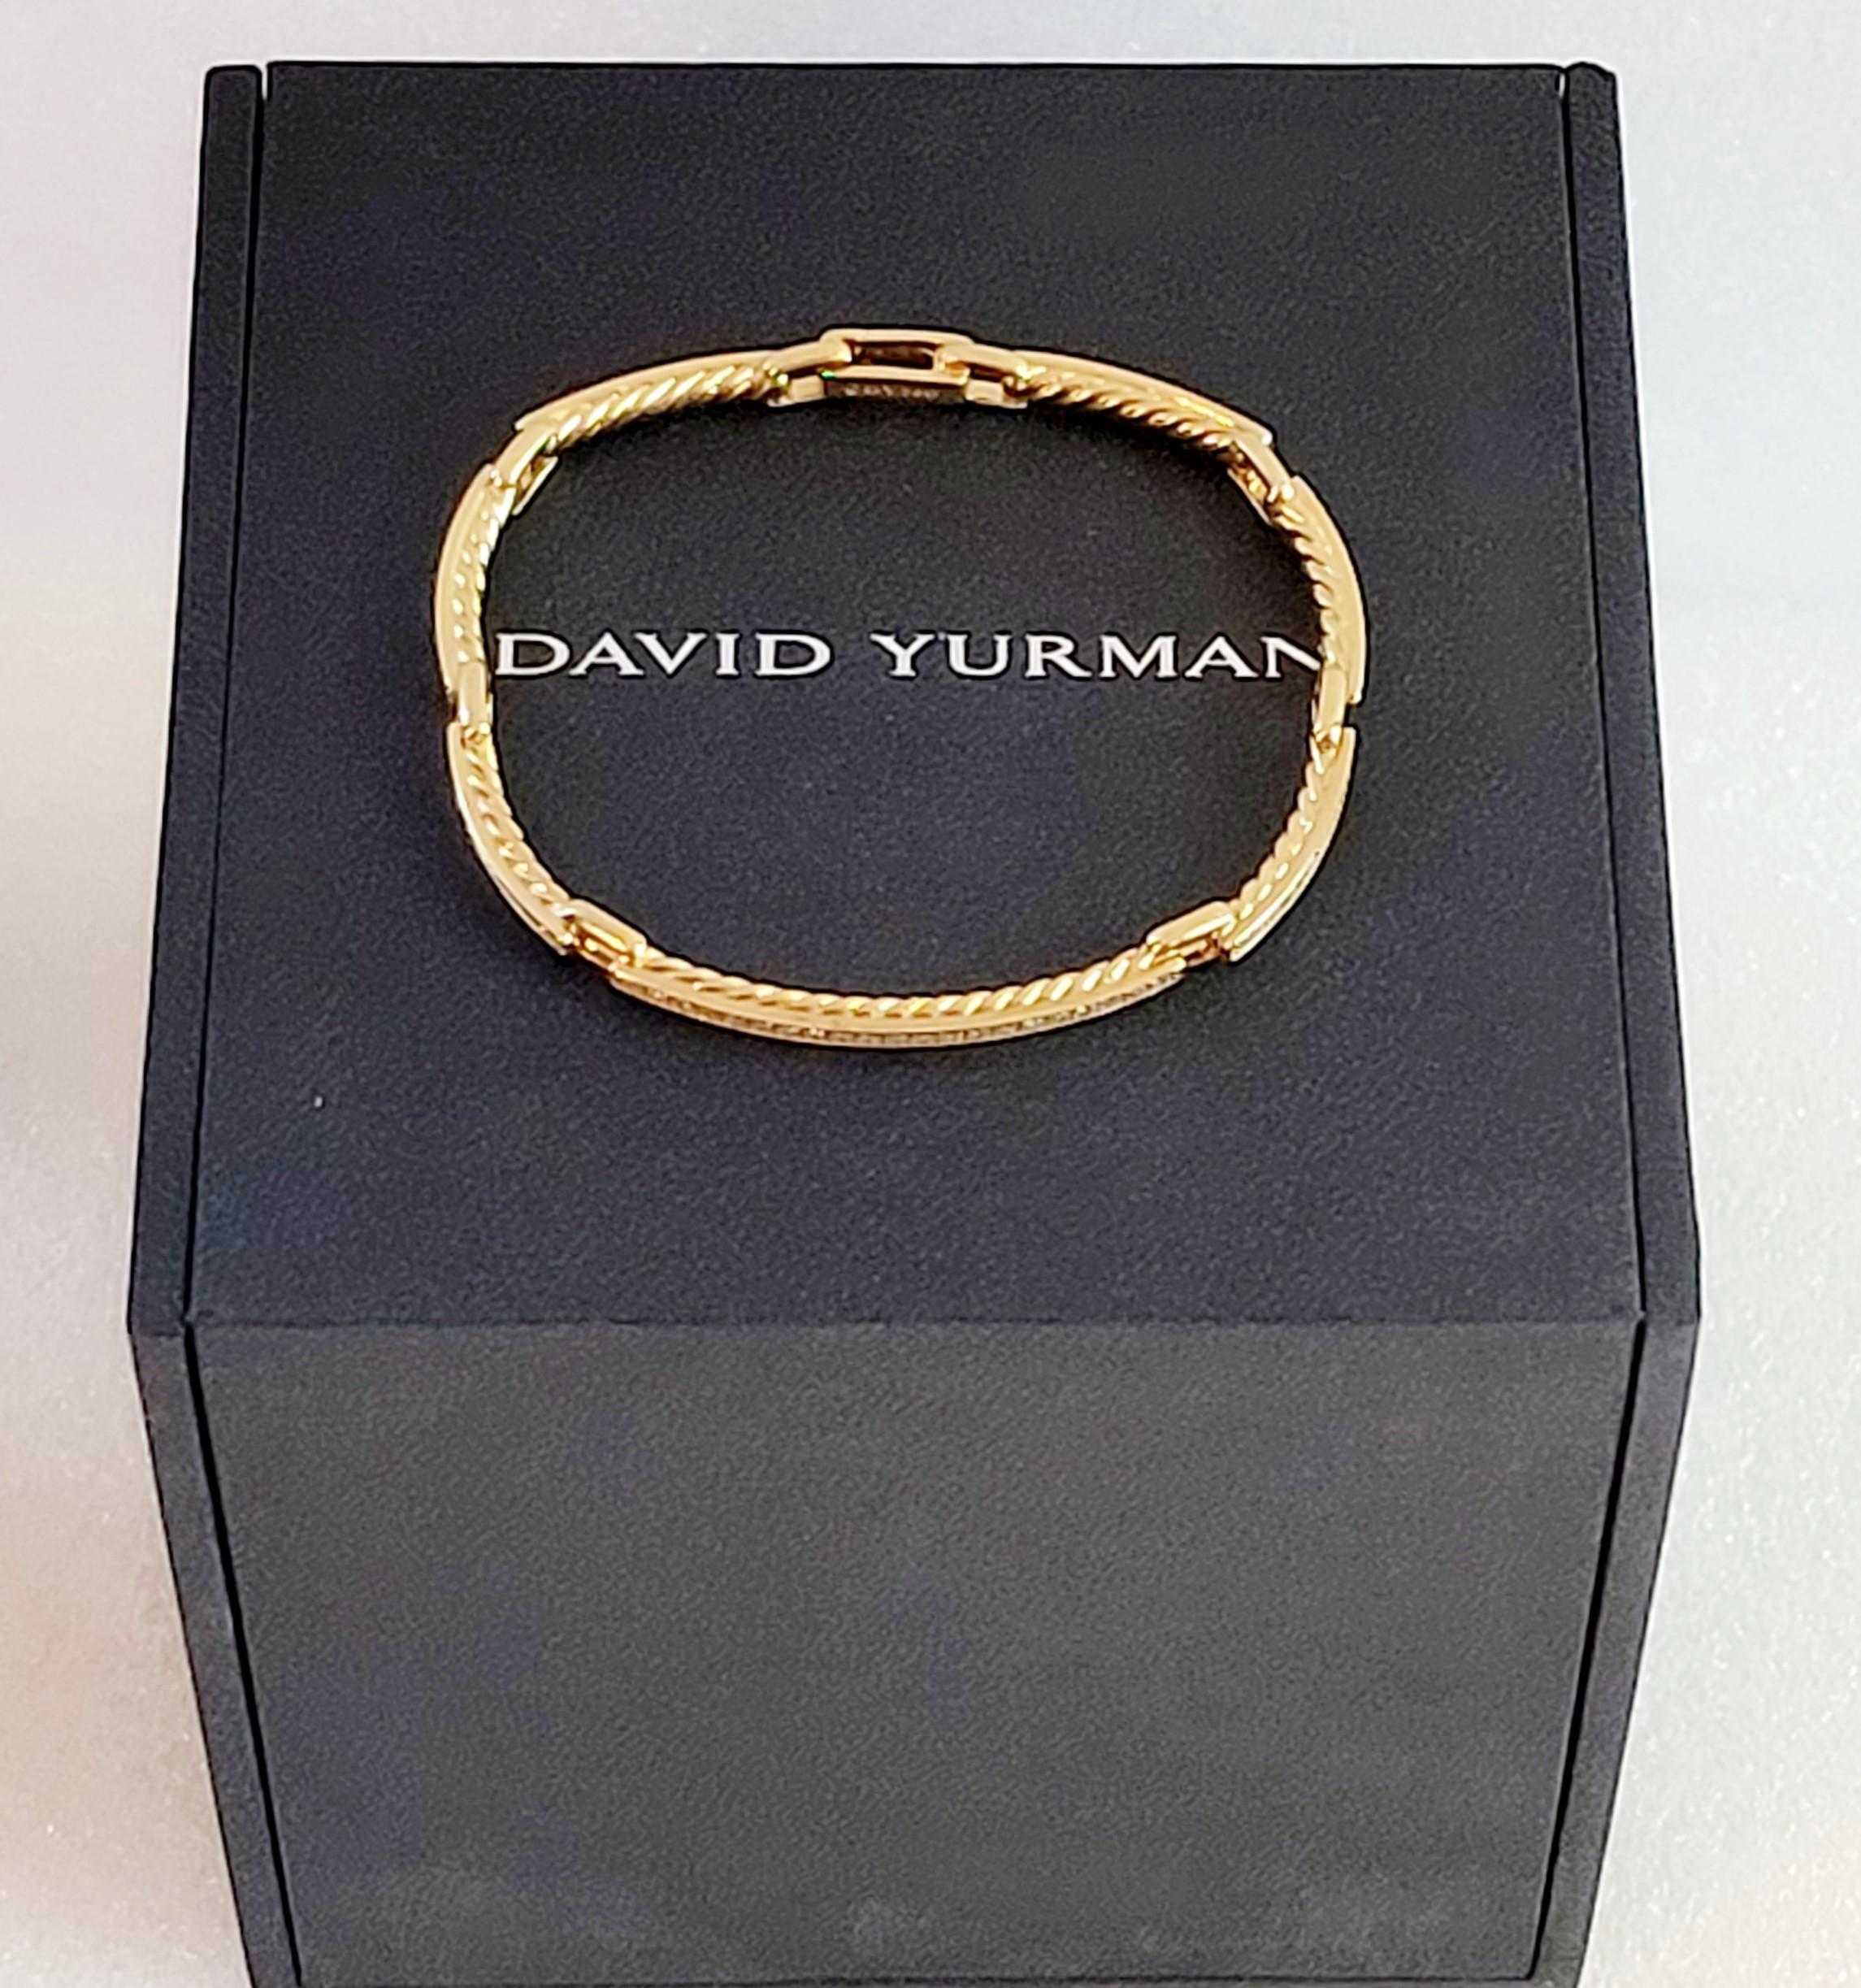 David Yurman Petite Pave Link Bracelet with Diamonds in 18K Gold, Size S In New Condition For Sale In New York, NY